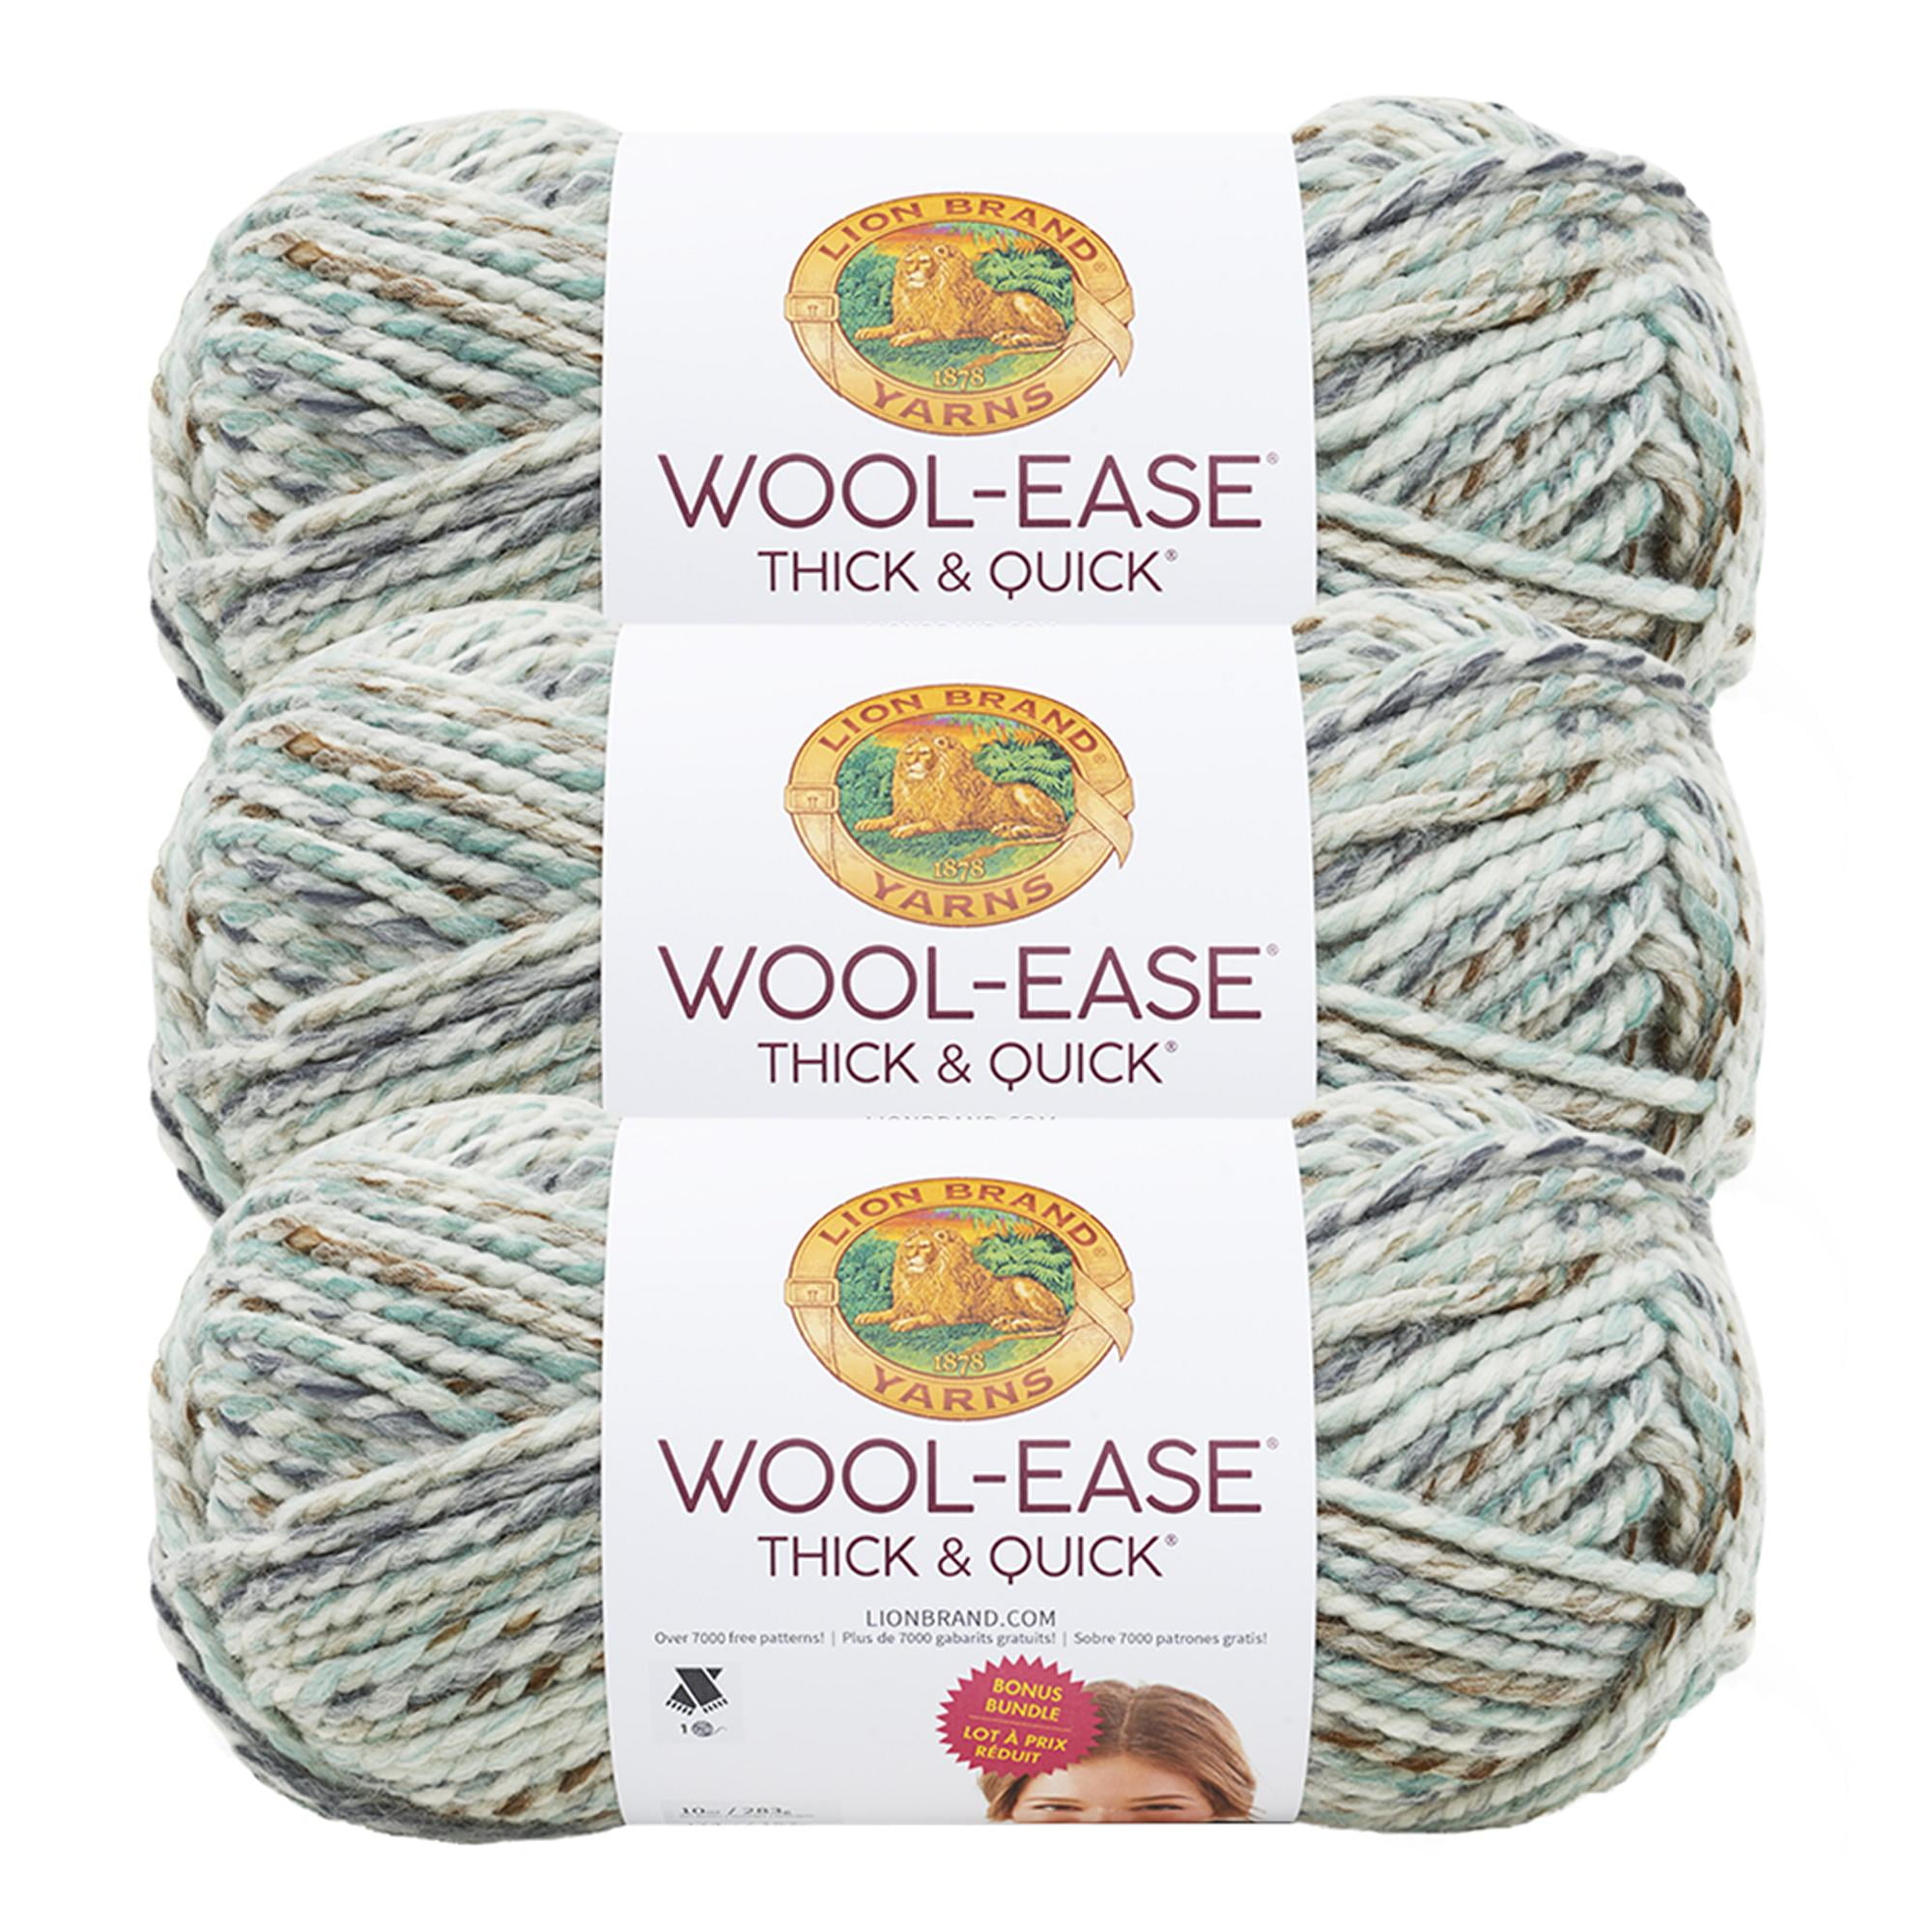 Lion Brand Yarn Wool-Ease Thick and Quick Bonus Bundle Seaglass Classic  Super Bulky Acrylic, Wool Multi-color Yarn 3 Pack